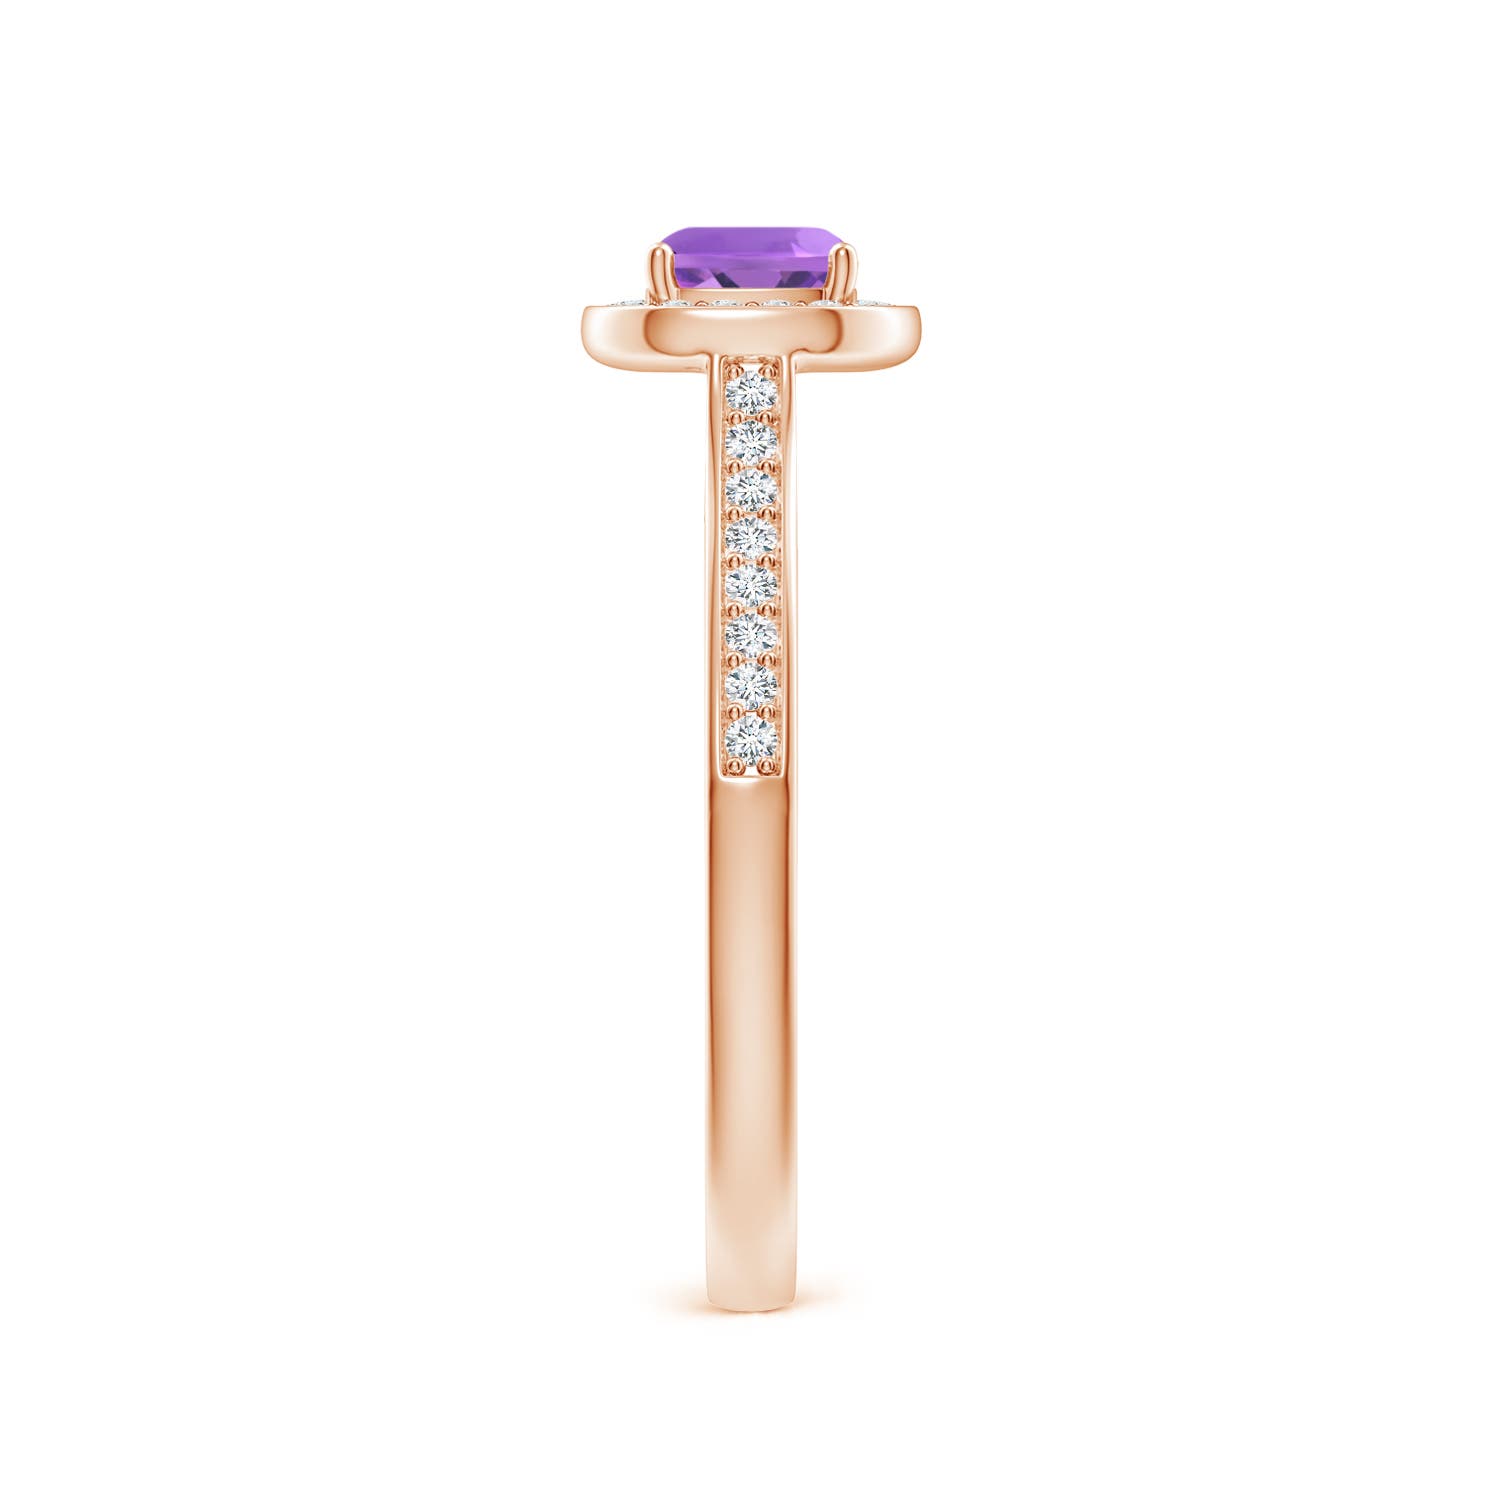 AA - Amethyst / 0.81 CT / 14 KT Rose Gold